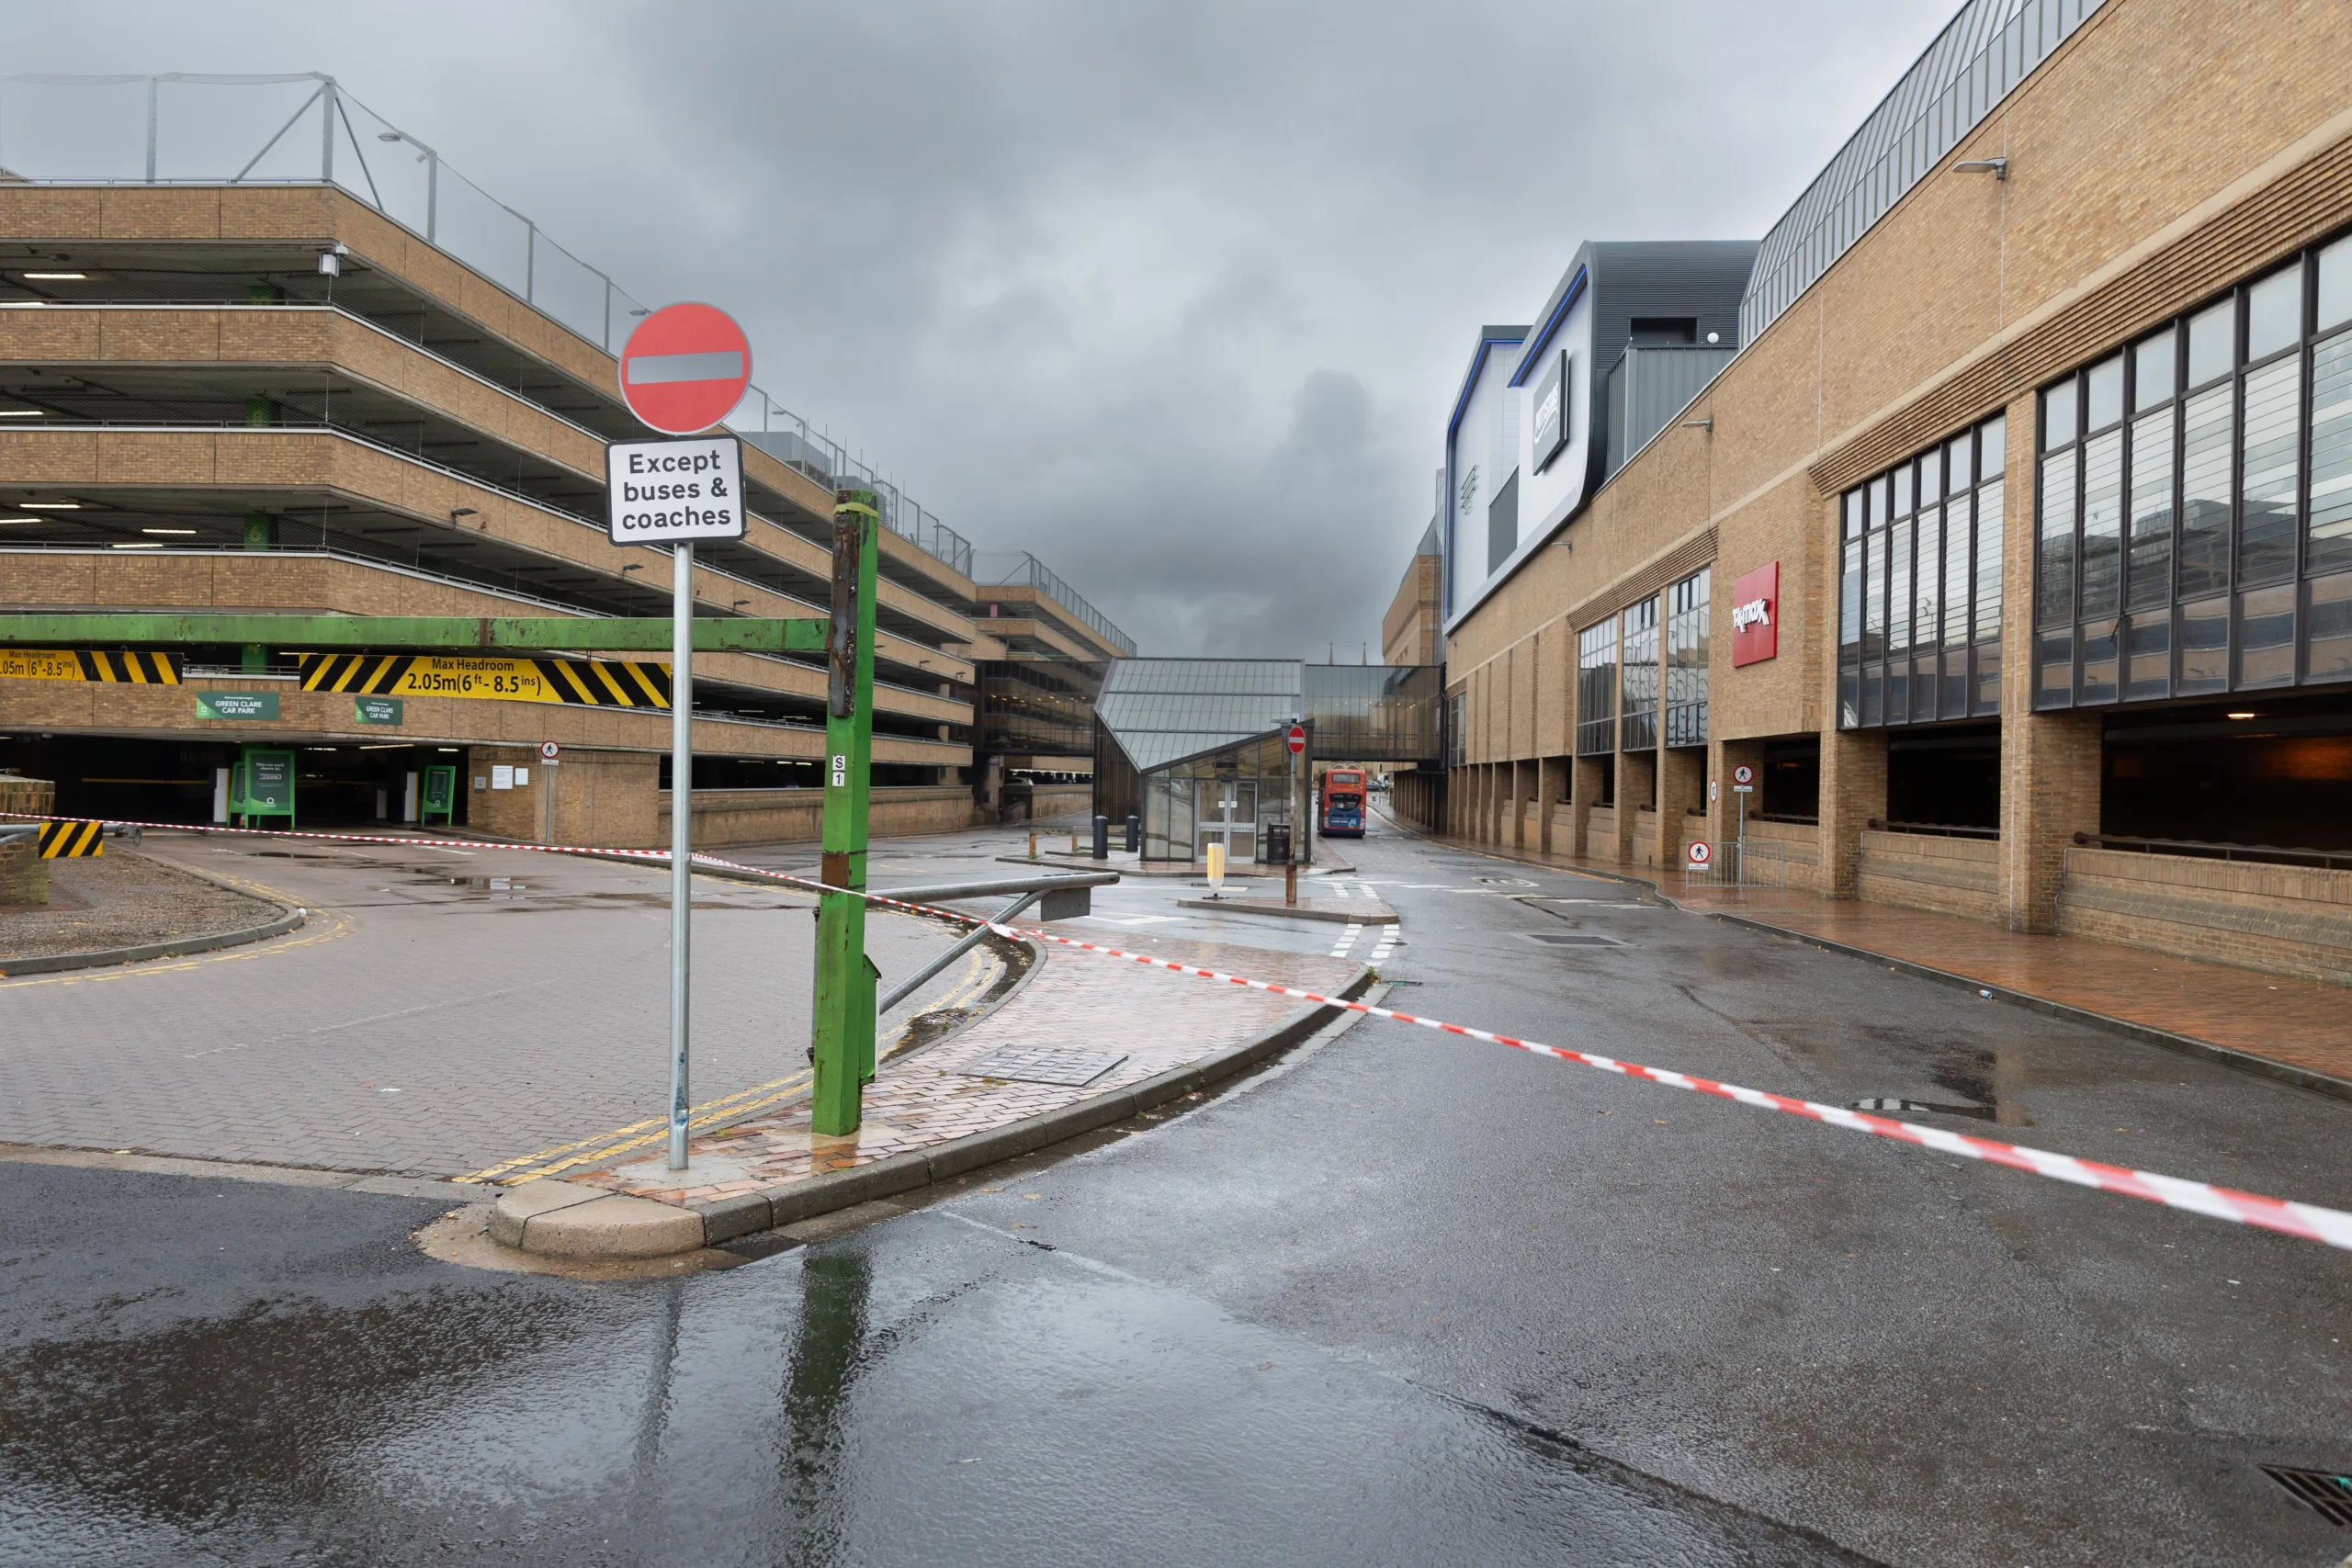 Police were called about the robberies of three boys, aged 13, 14 and 15, at the entrance to Queensgate shopping centre at about 1pm on Saturday, 4 November. PHOTO: Terry Harris for CambsNews